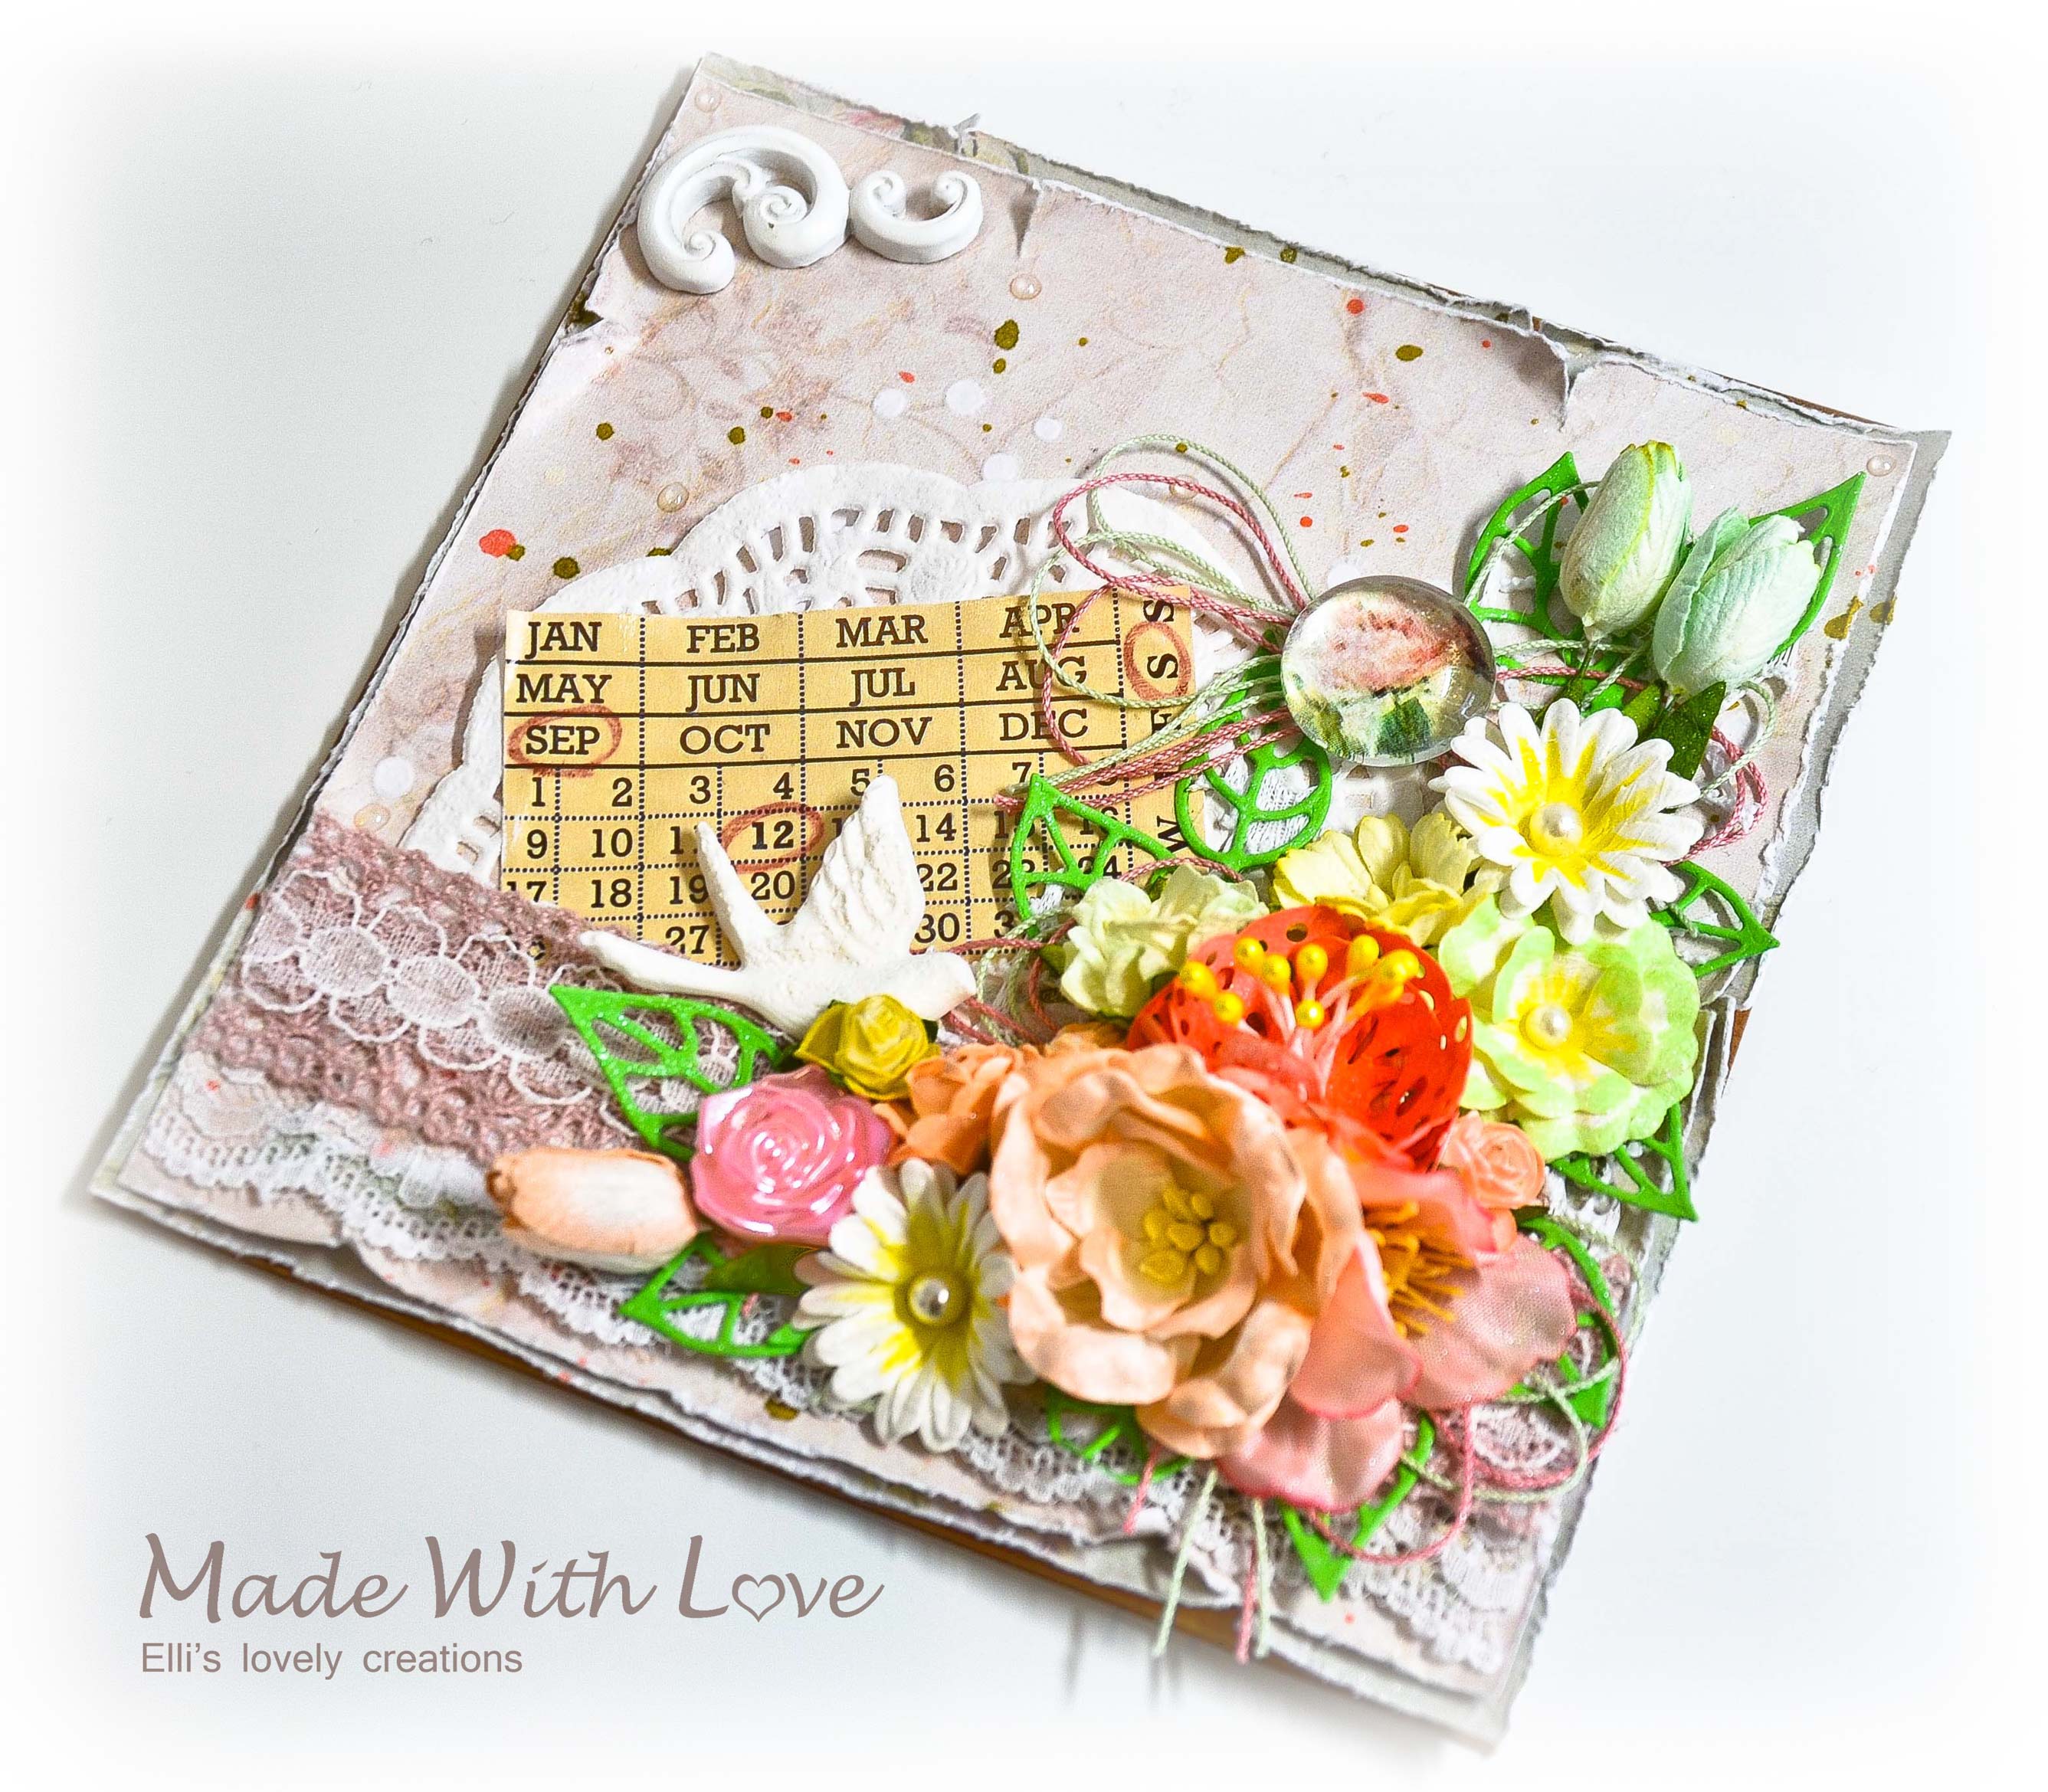 Guest Designer at The Crazy Challenge with a Mixed Media Card